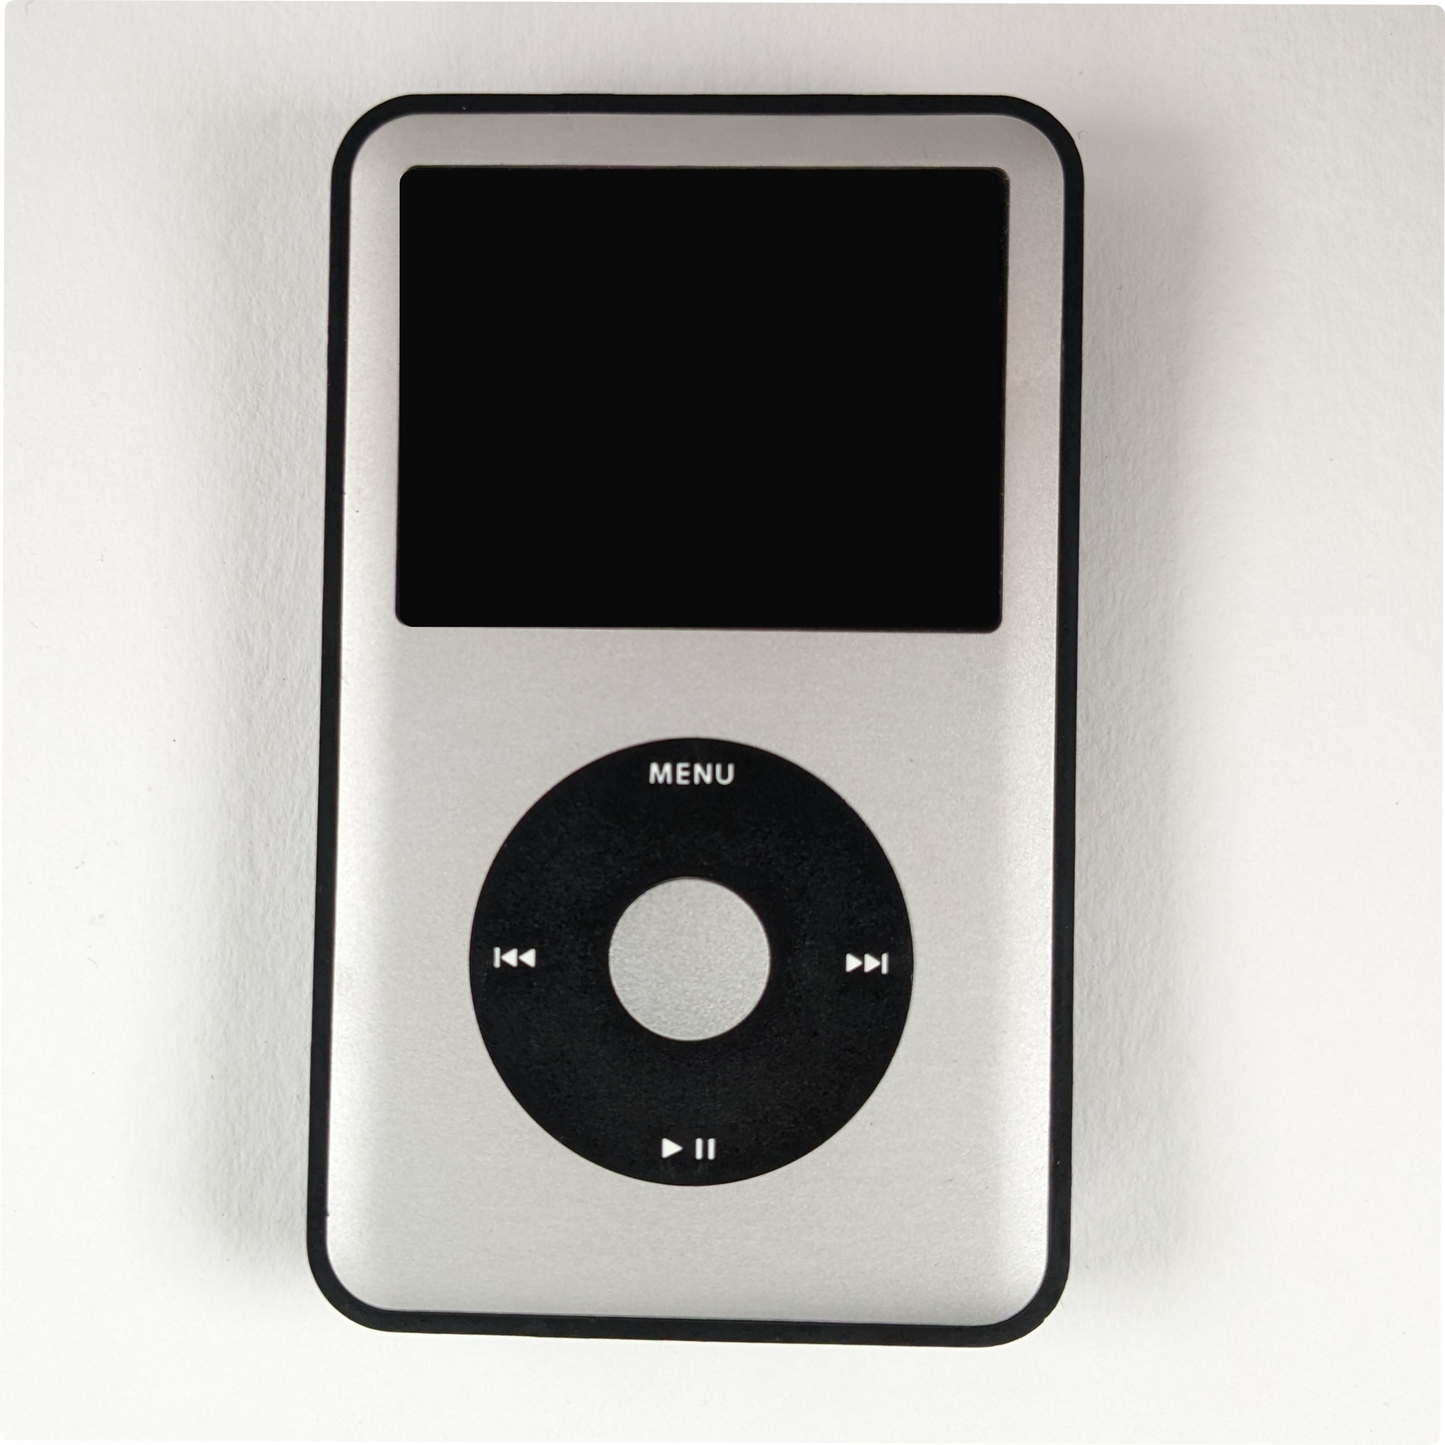 iPod Classic with Classic Connect pre-installed